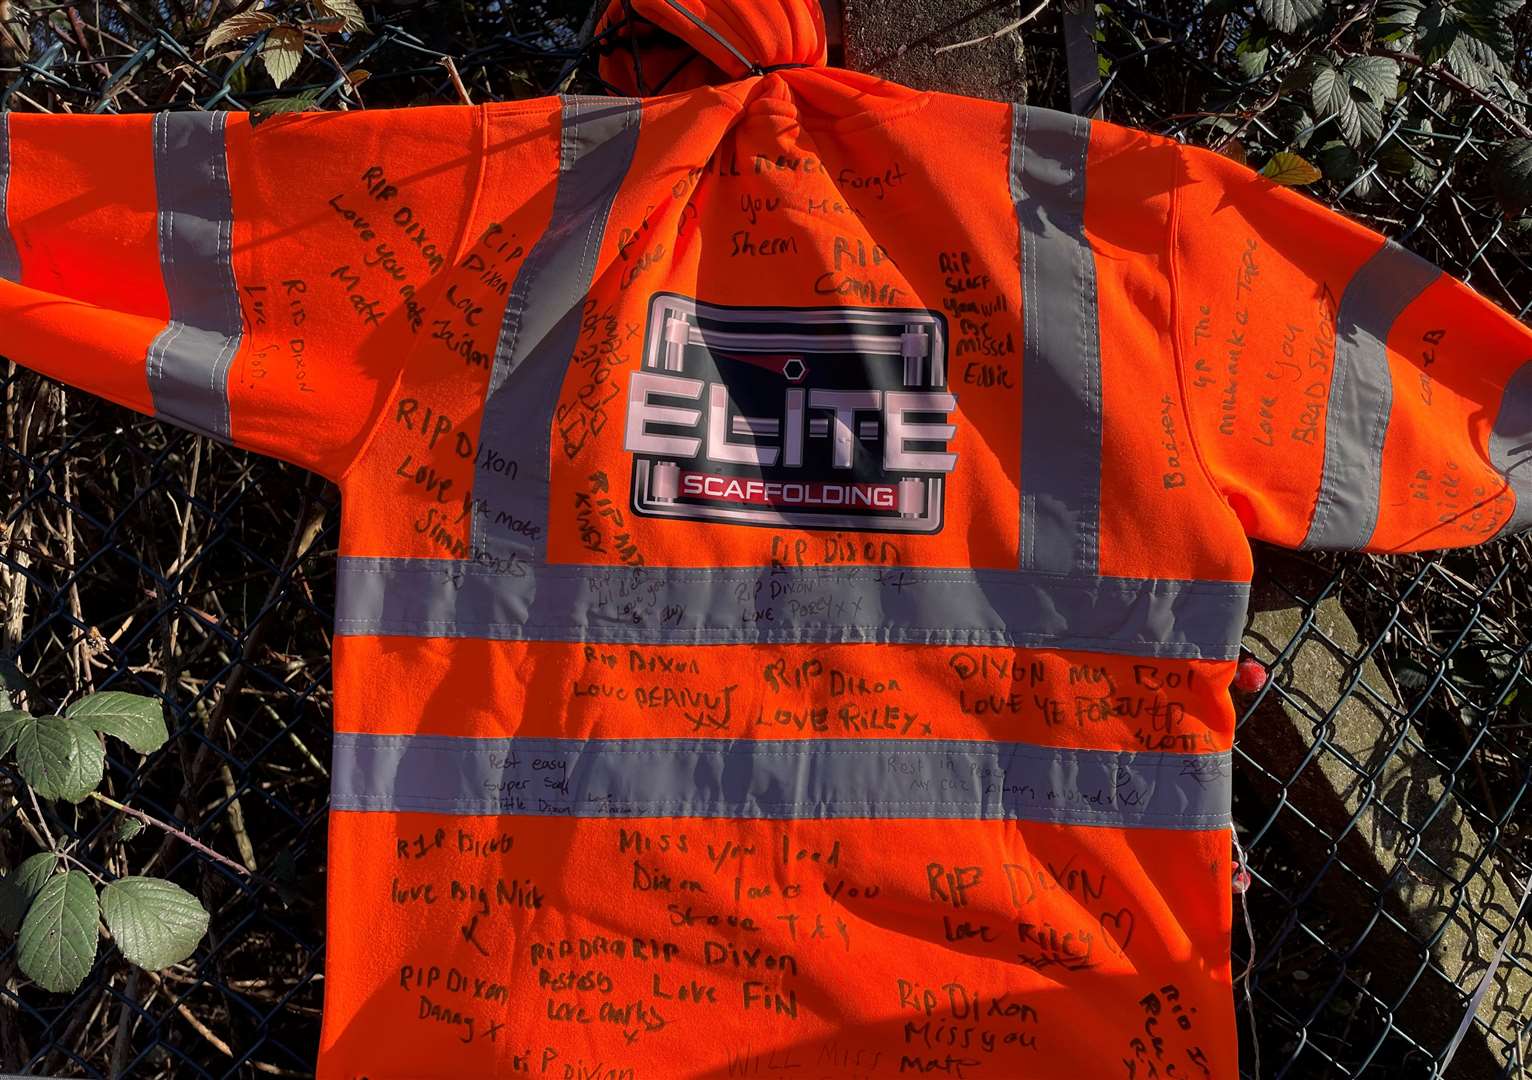 Messages from his work colleagues have been left on a hi-vis jacket